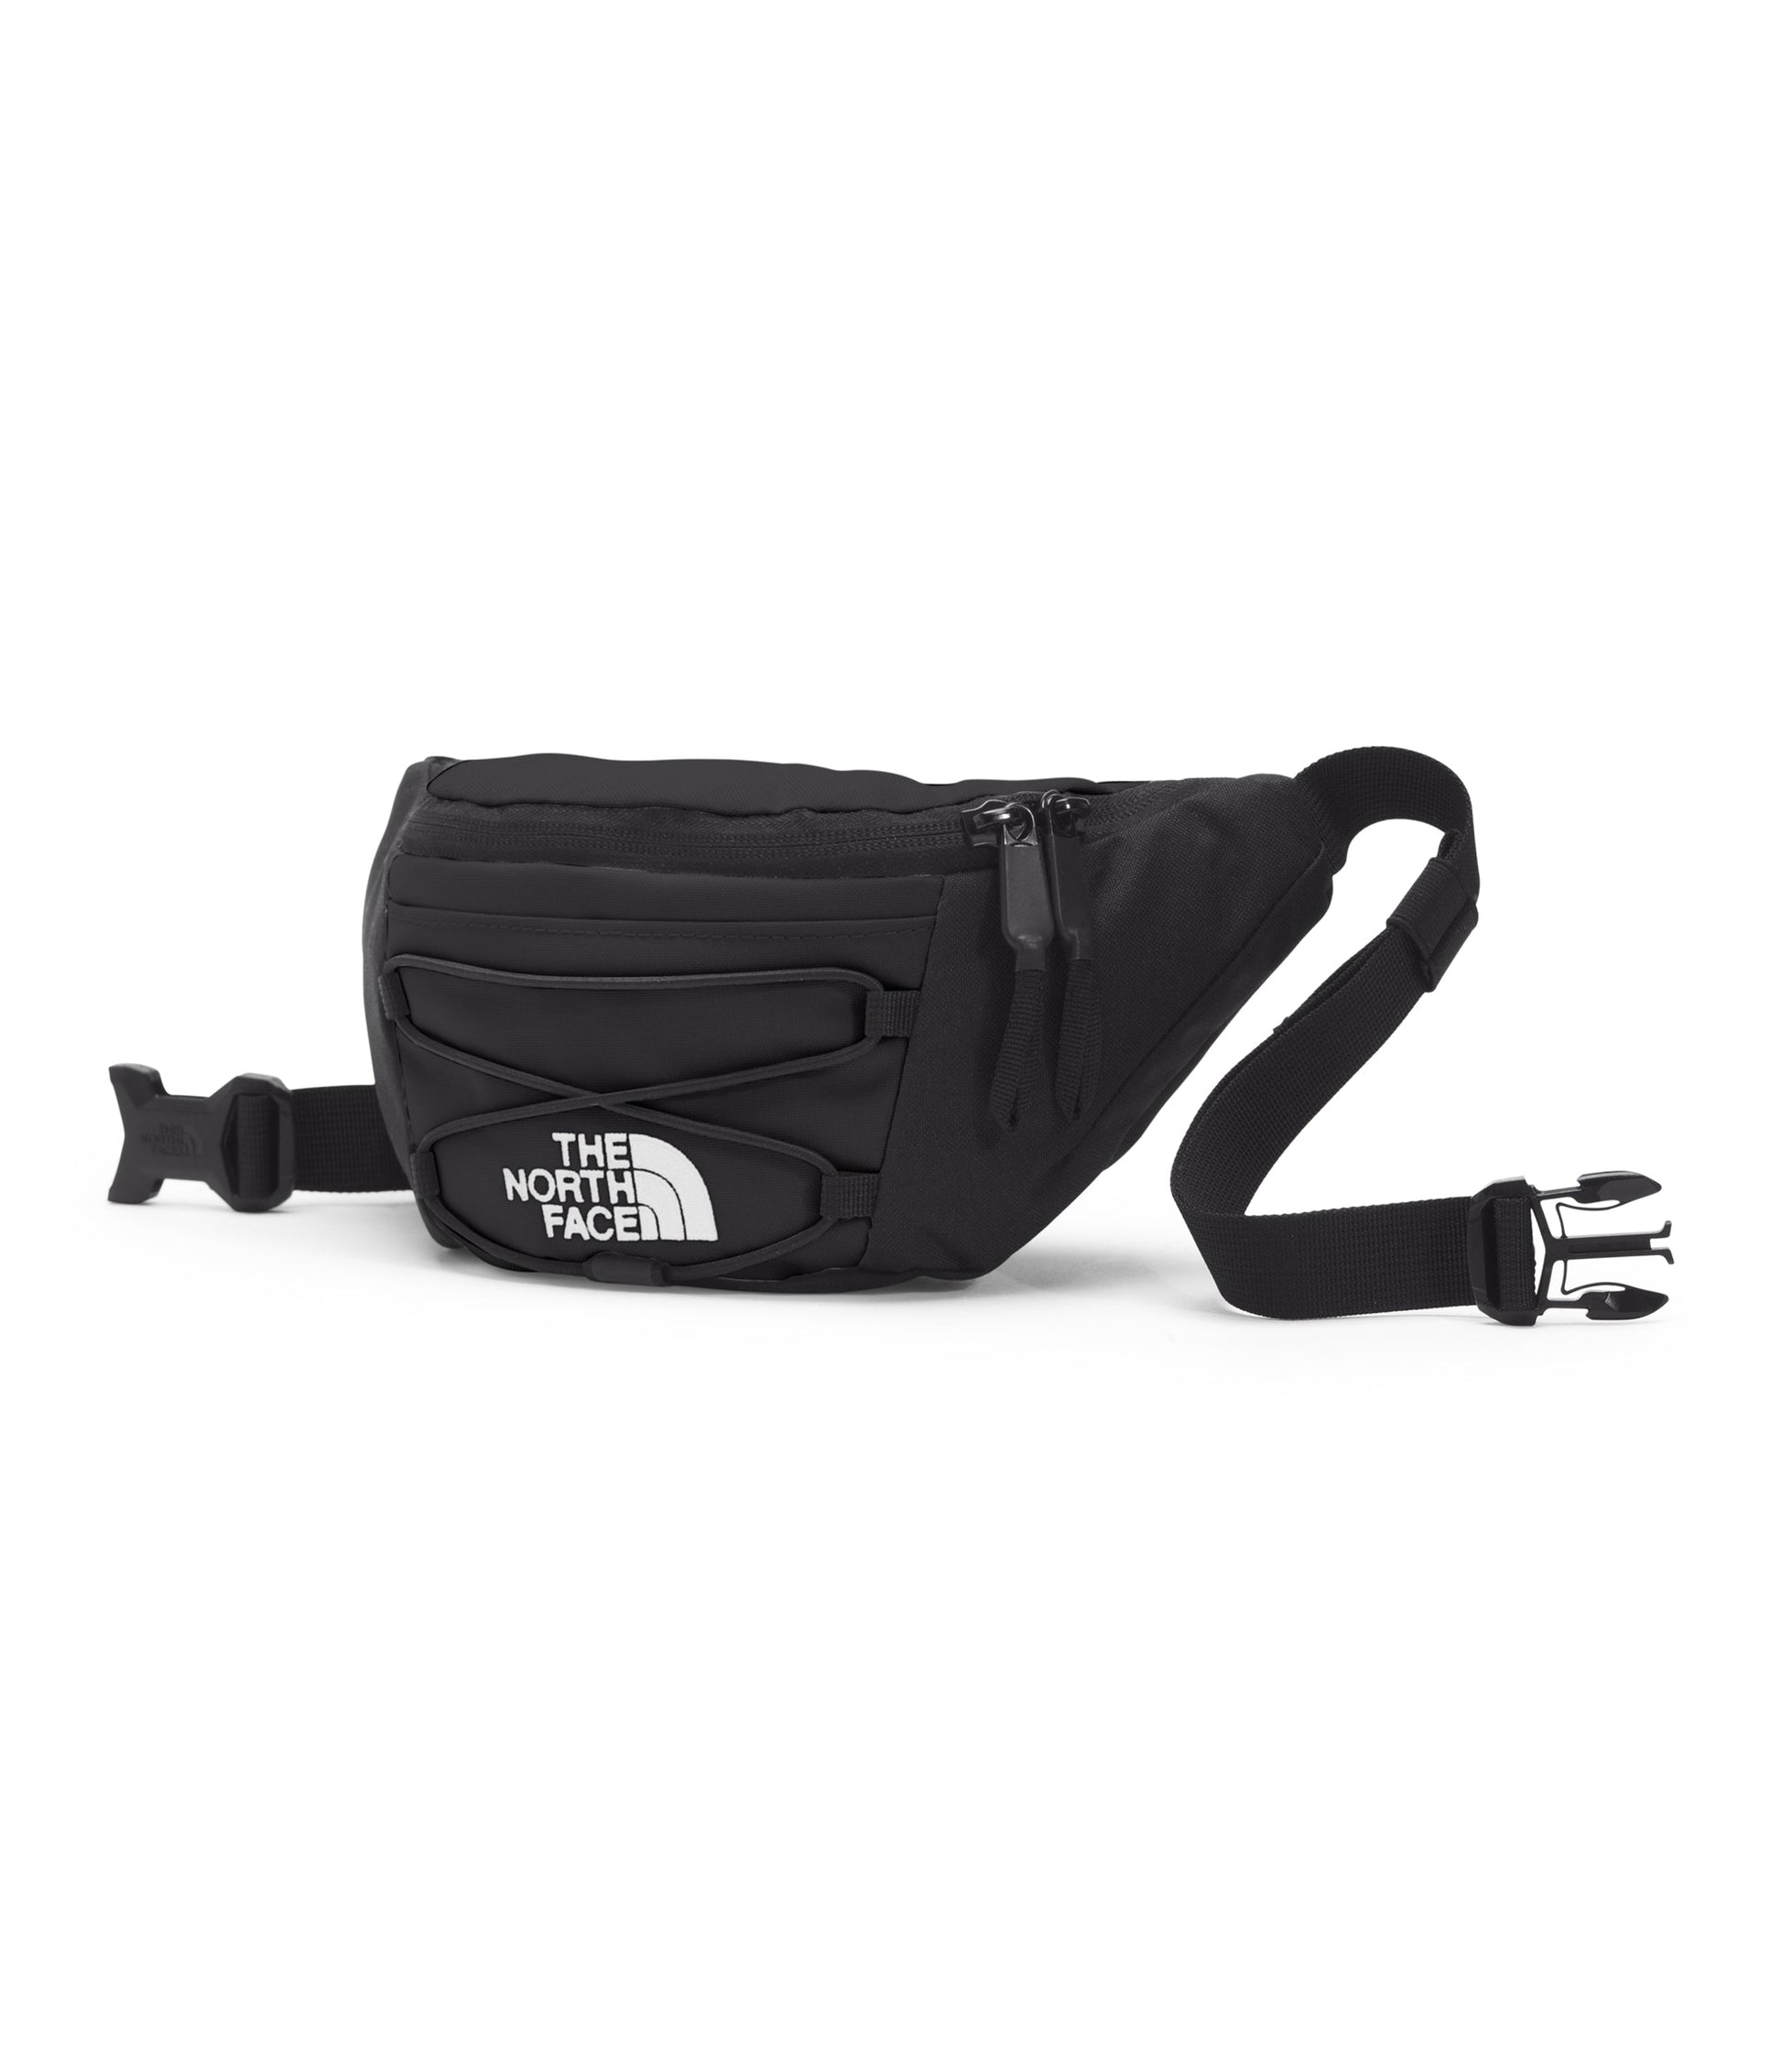 The North Face Jester Lumbar Pack - TNF Black